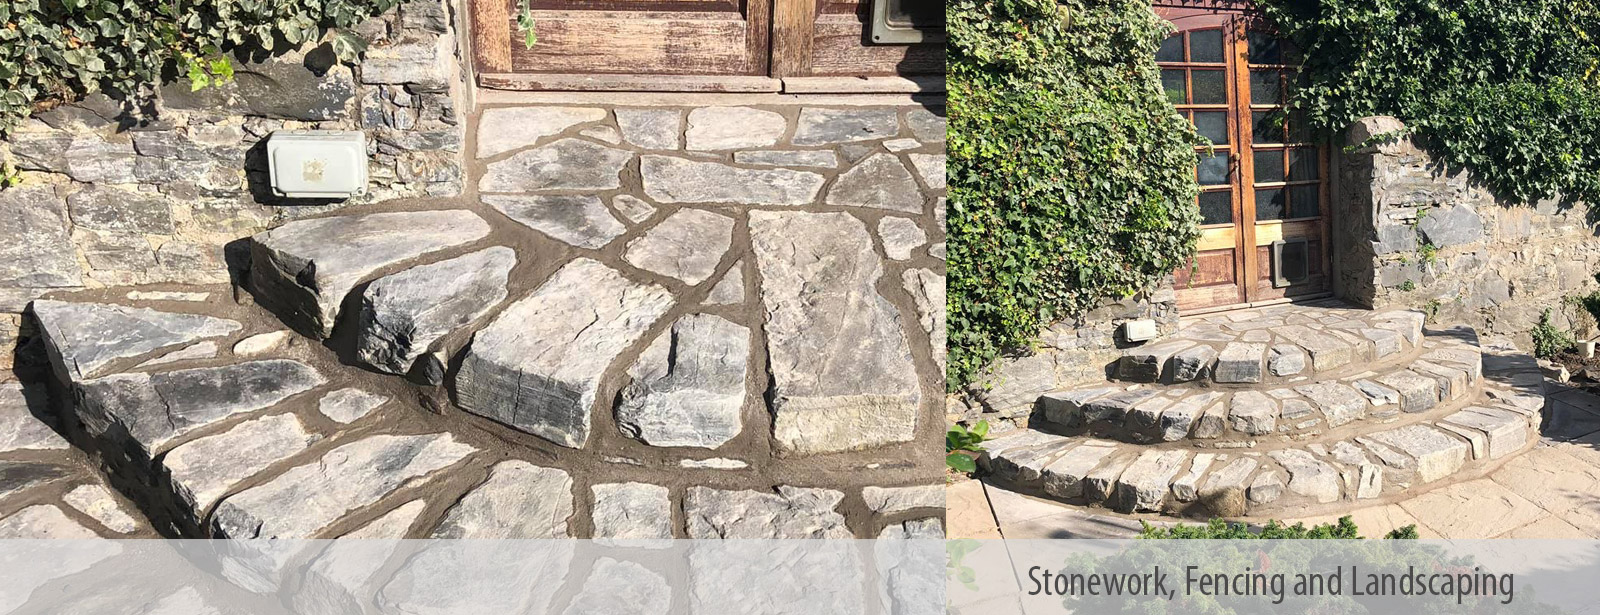 DMS Stoneworks - Stonework, Fencing and Landscaping